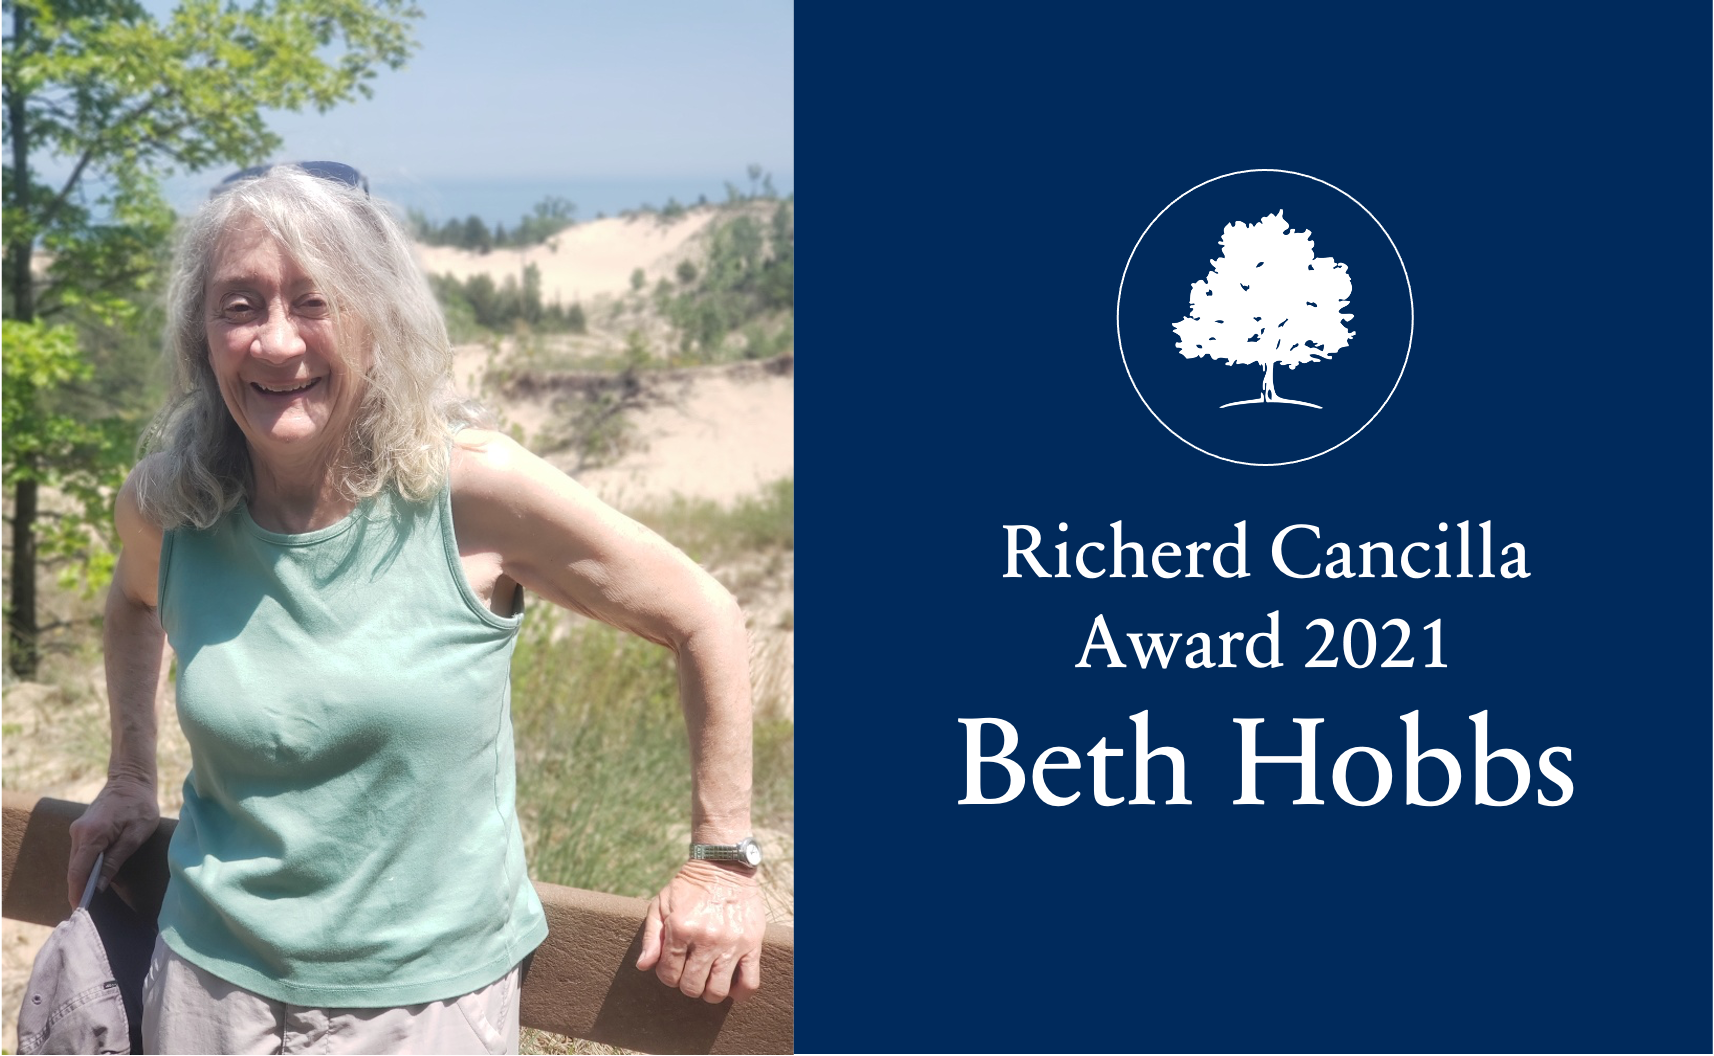 Getting to Know You: Meet Beth Hobbs, our 2021 Richerd Cancilla Award Winner